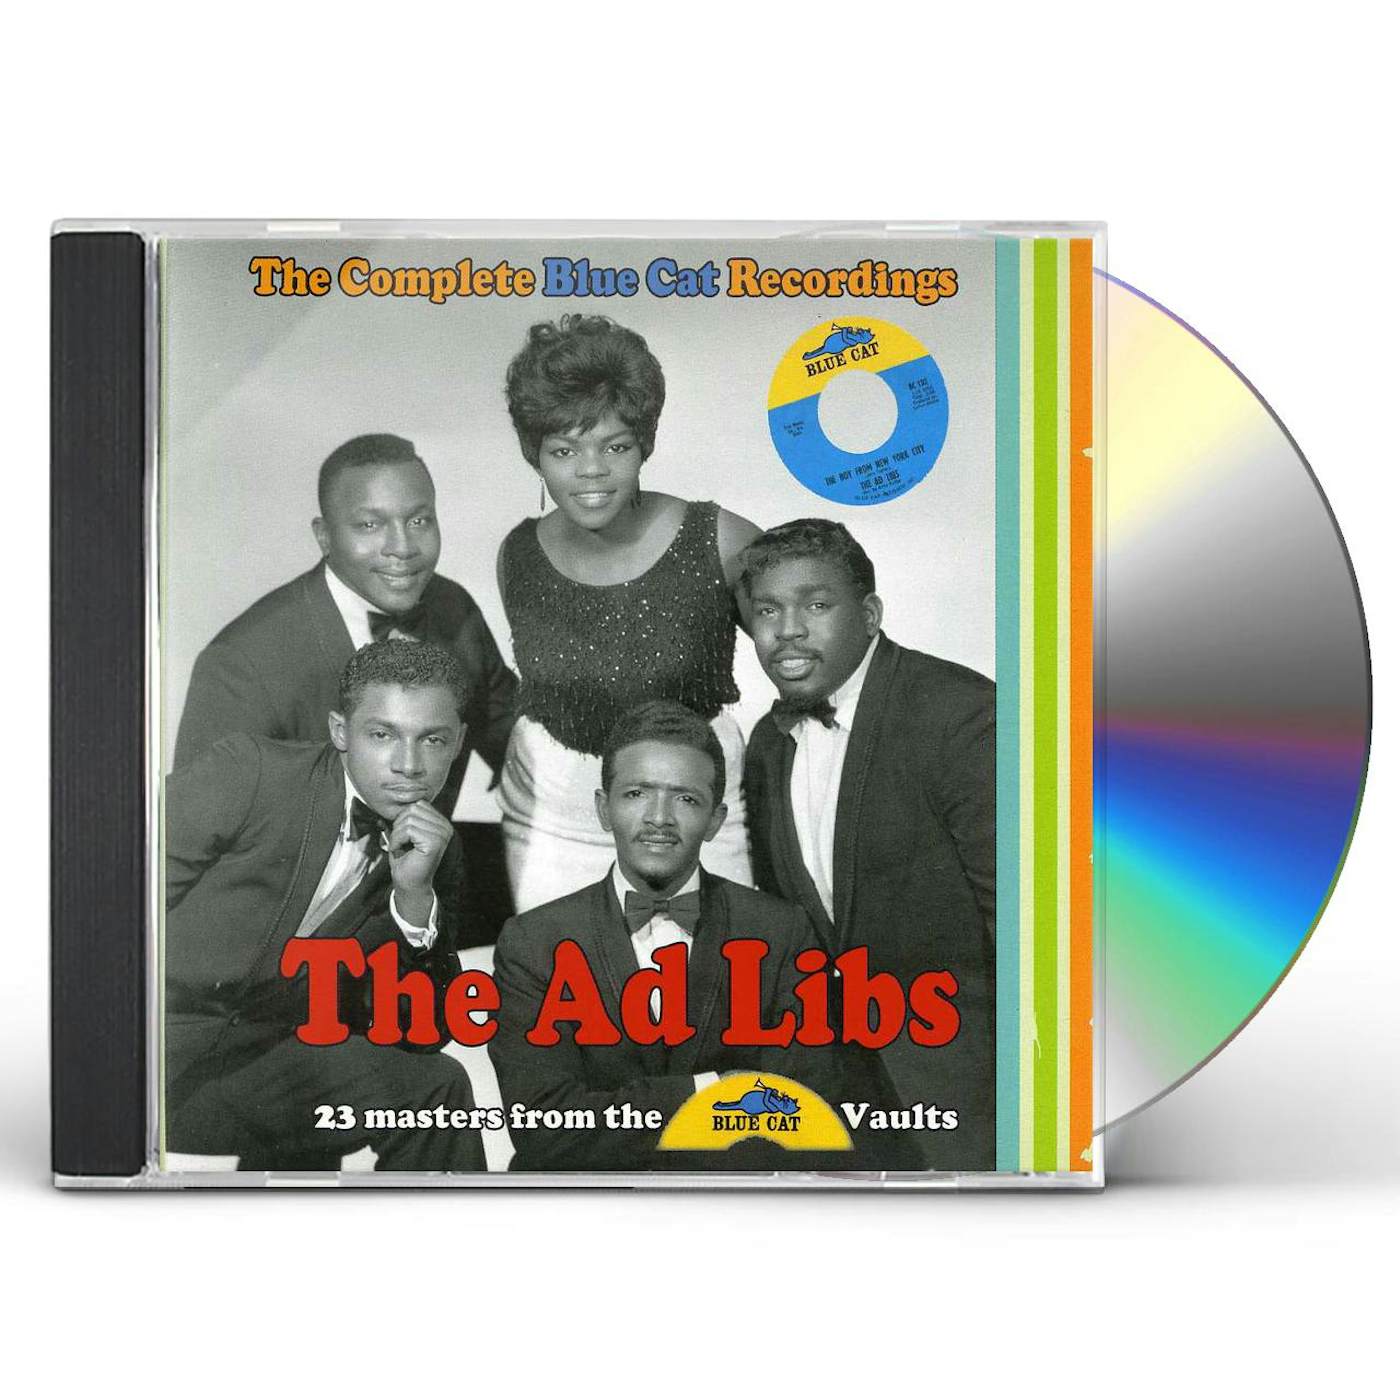 The Ad Libs COMPLETE BLUE CAT RECORDINGS CD